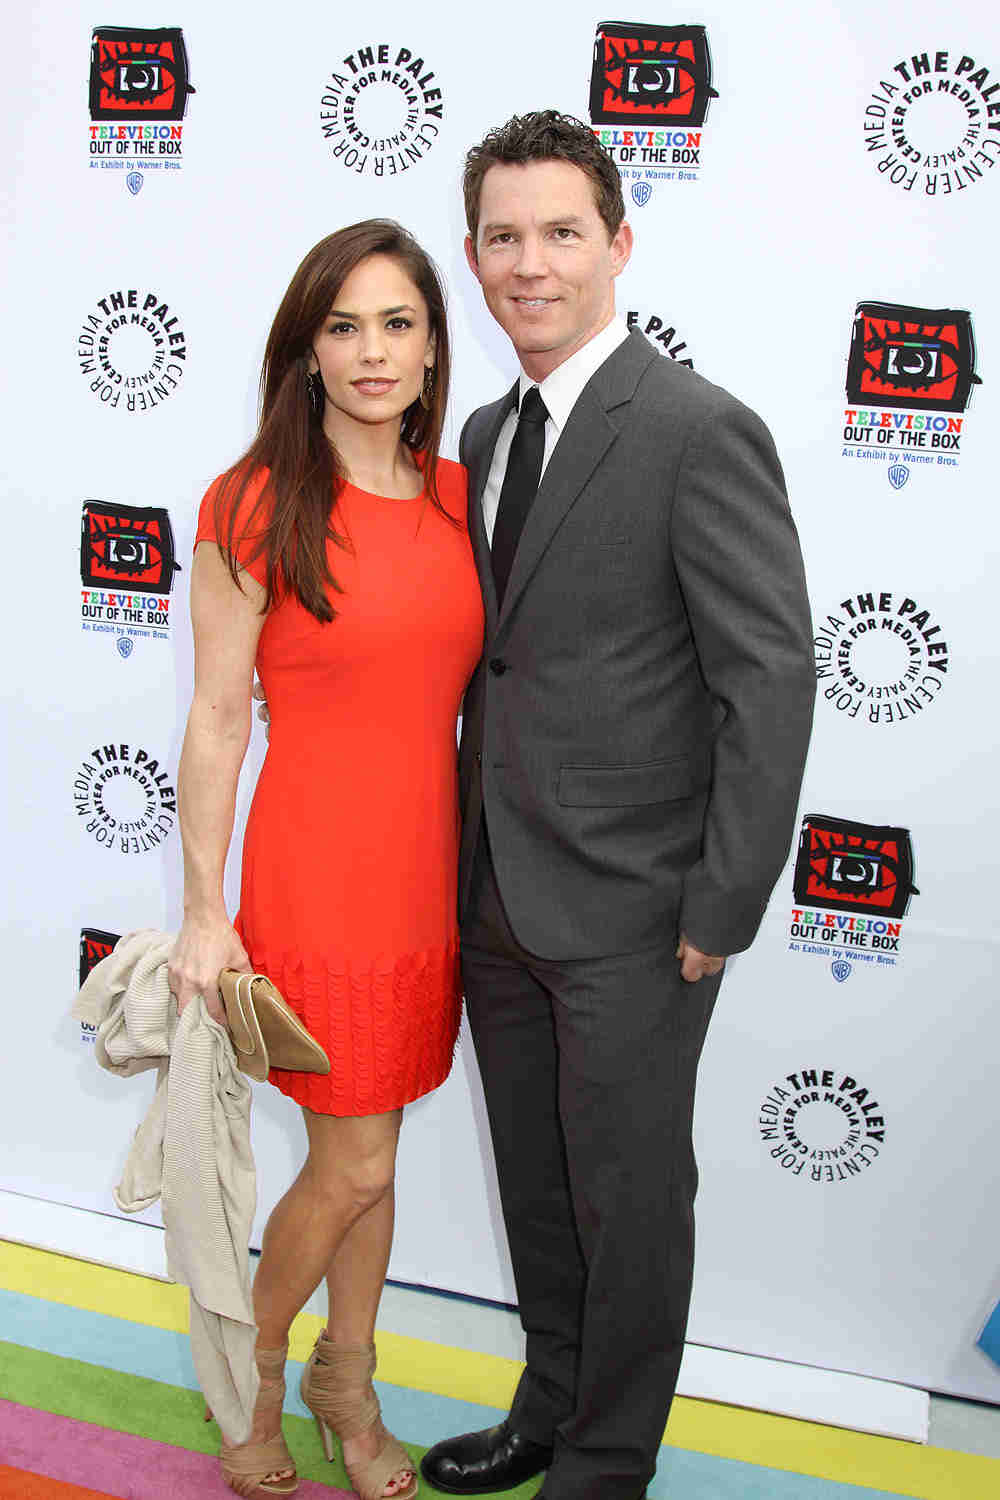 Image of Shawn Hatosy with his wife Kelly Albanese